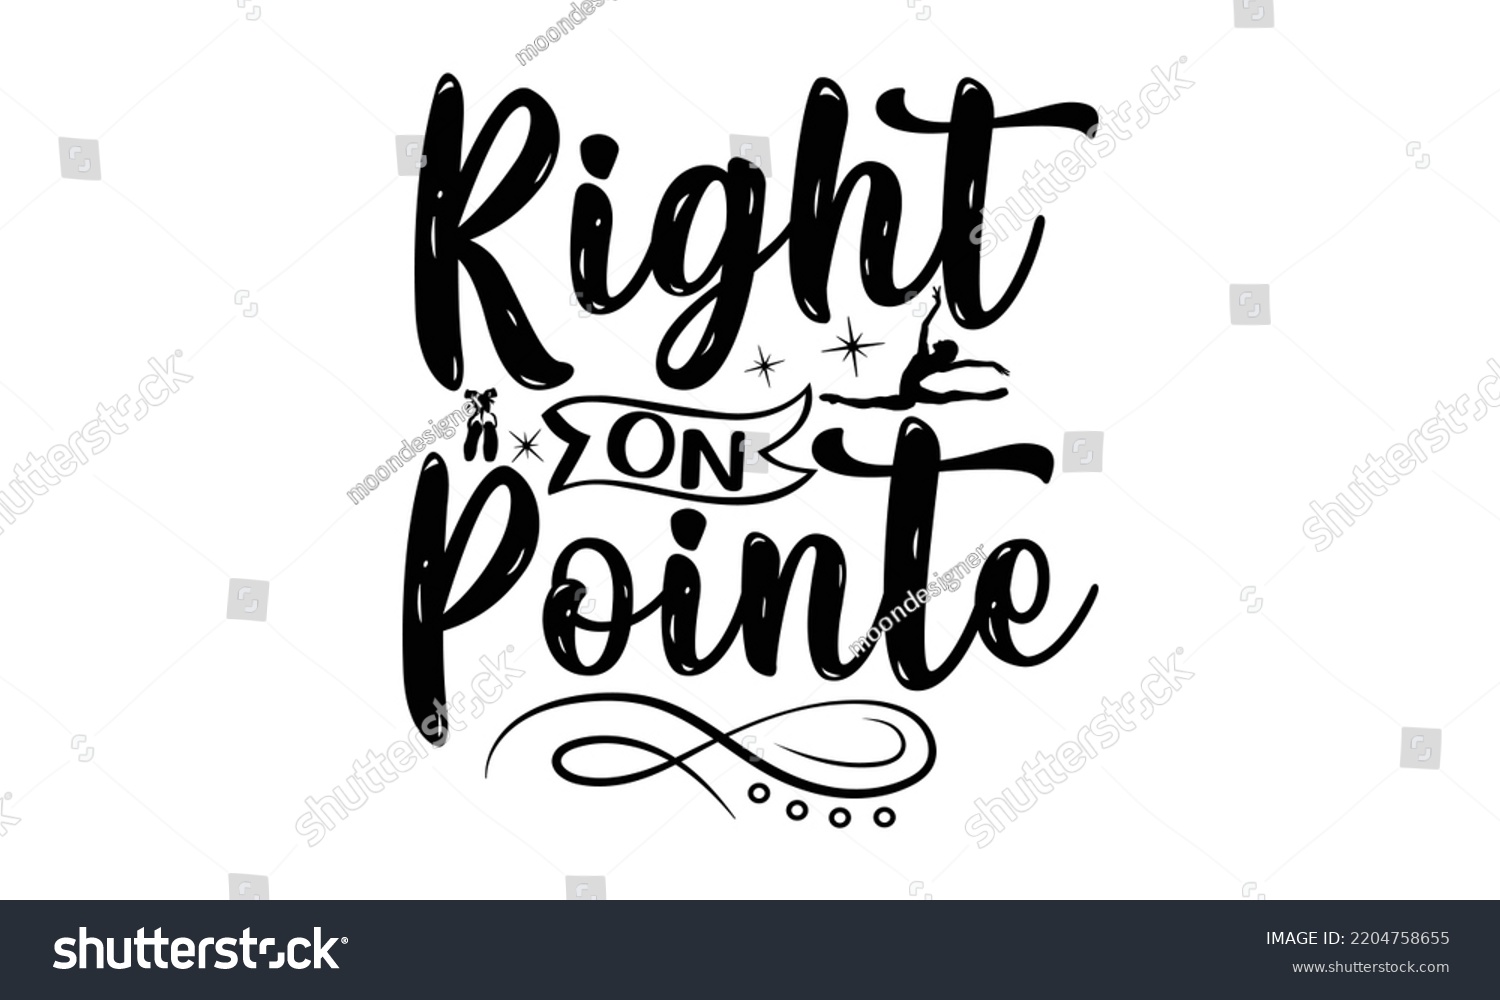 SVG of Right on pointe - Ballet svg t shirt design, ballet SVG Cut Files, Girl Ballet Design, Hand drawn lettering phrase and vector sign, EPS 10 svg